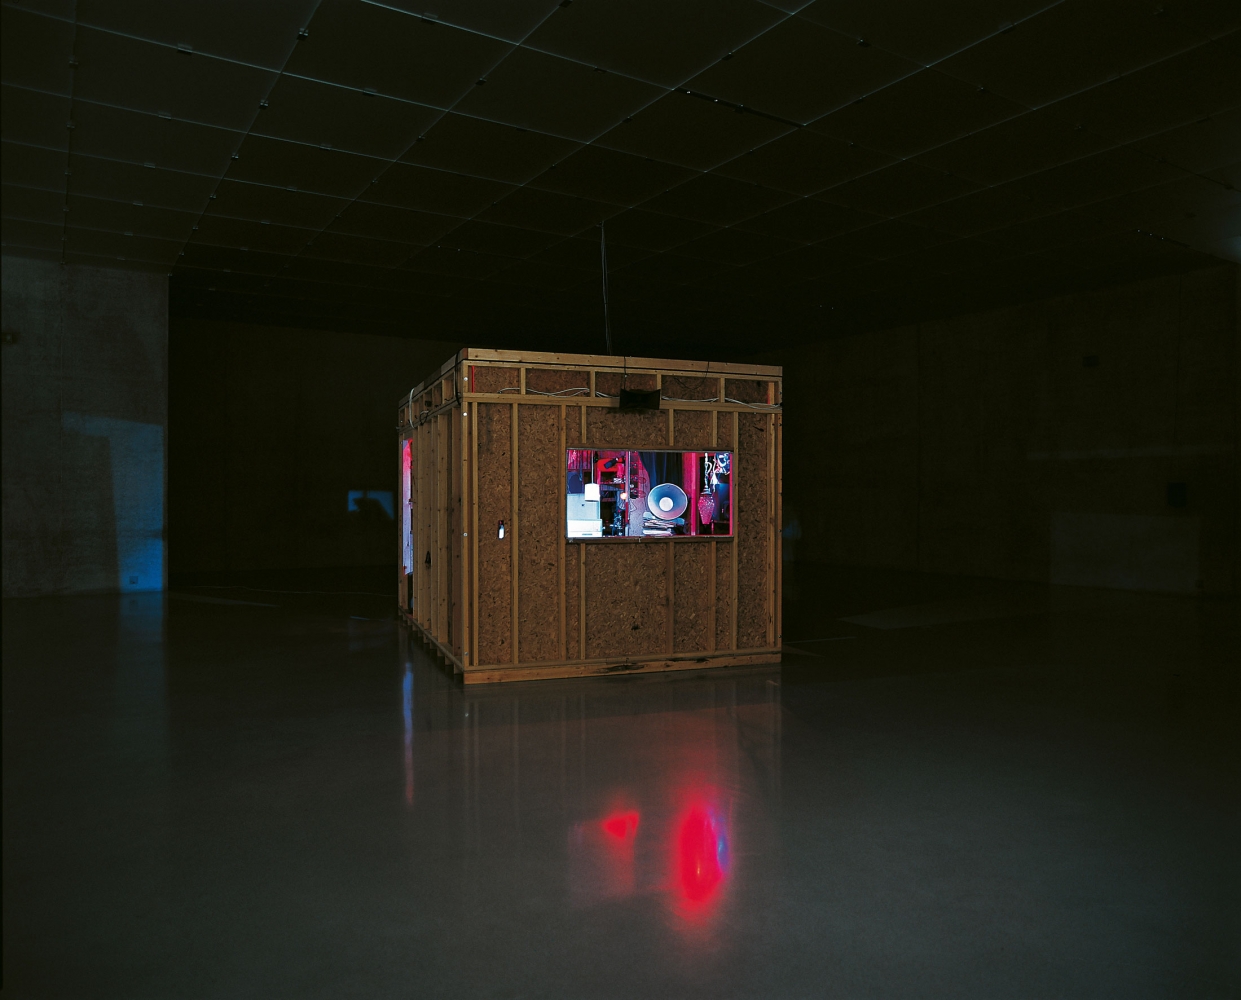 Janet Cardiff and George Bures Miller
Opera for a Small Room, 2005
Mixed media installation with sound and synchronized lighting
Duration: 20 mintes, loop
102 2/5 x 118 x 177 inches
(206.1 x 299.7 x 449.6 cm)
Installation view of&amp;nbsp;&amp;ldquo;Sensorium: Embodied Experience, Technology, and Contemporary Art: Part I&amp;rdquo; at the MIT List Visual Arts Center
Photo: Markus Tretter